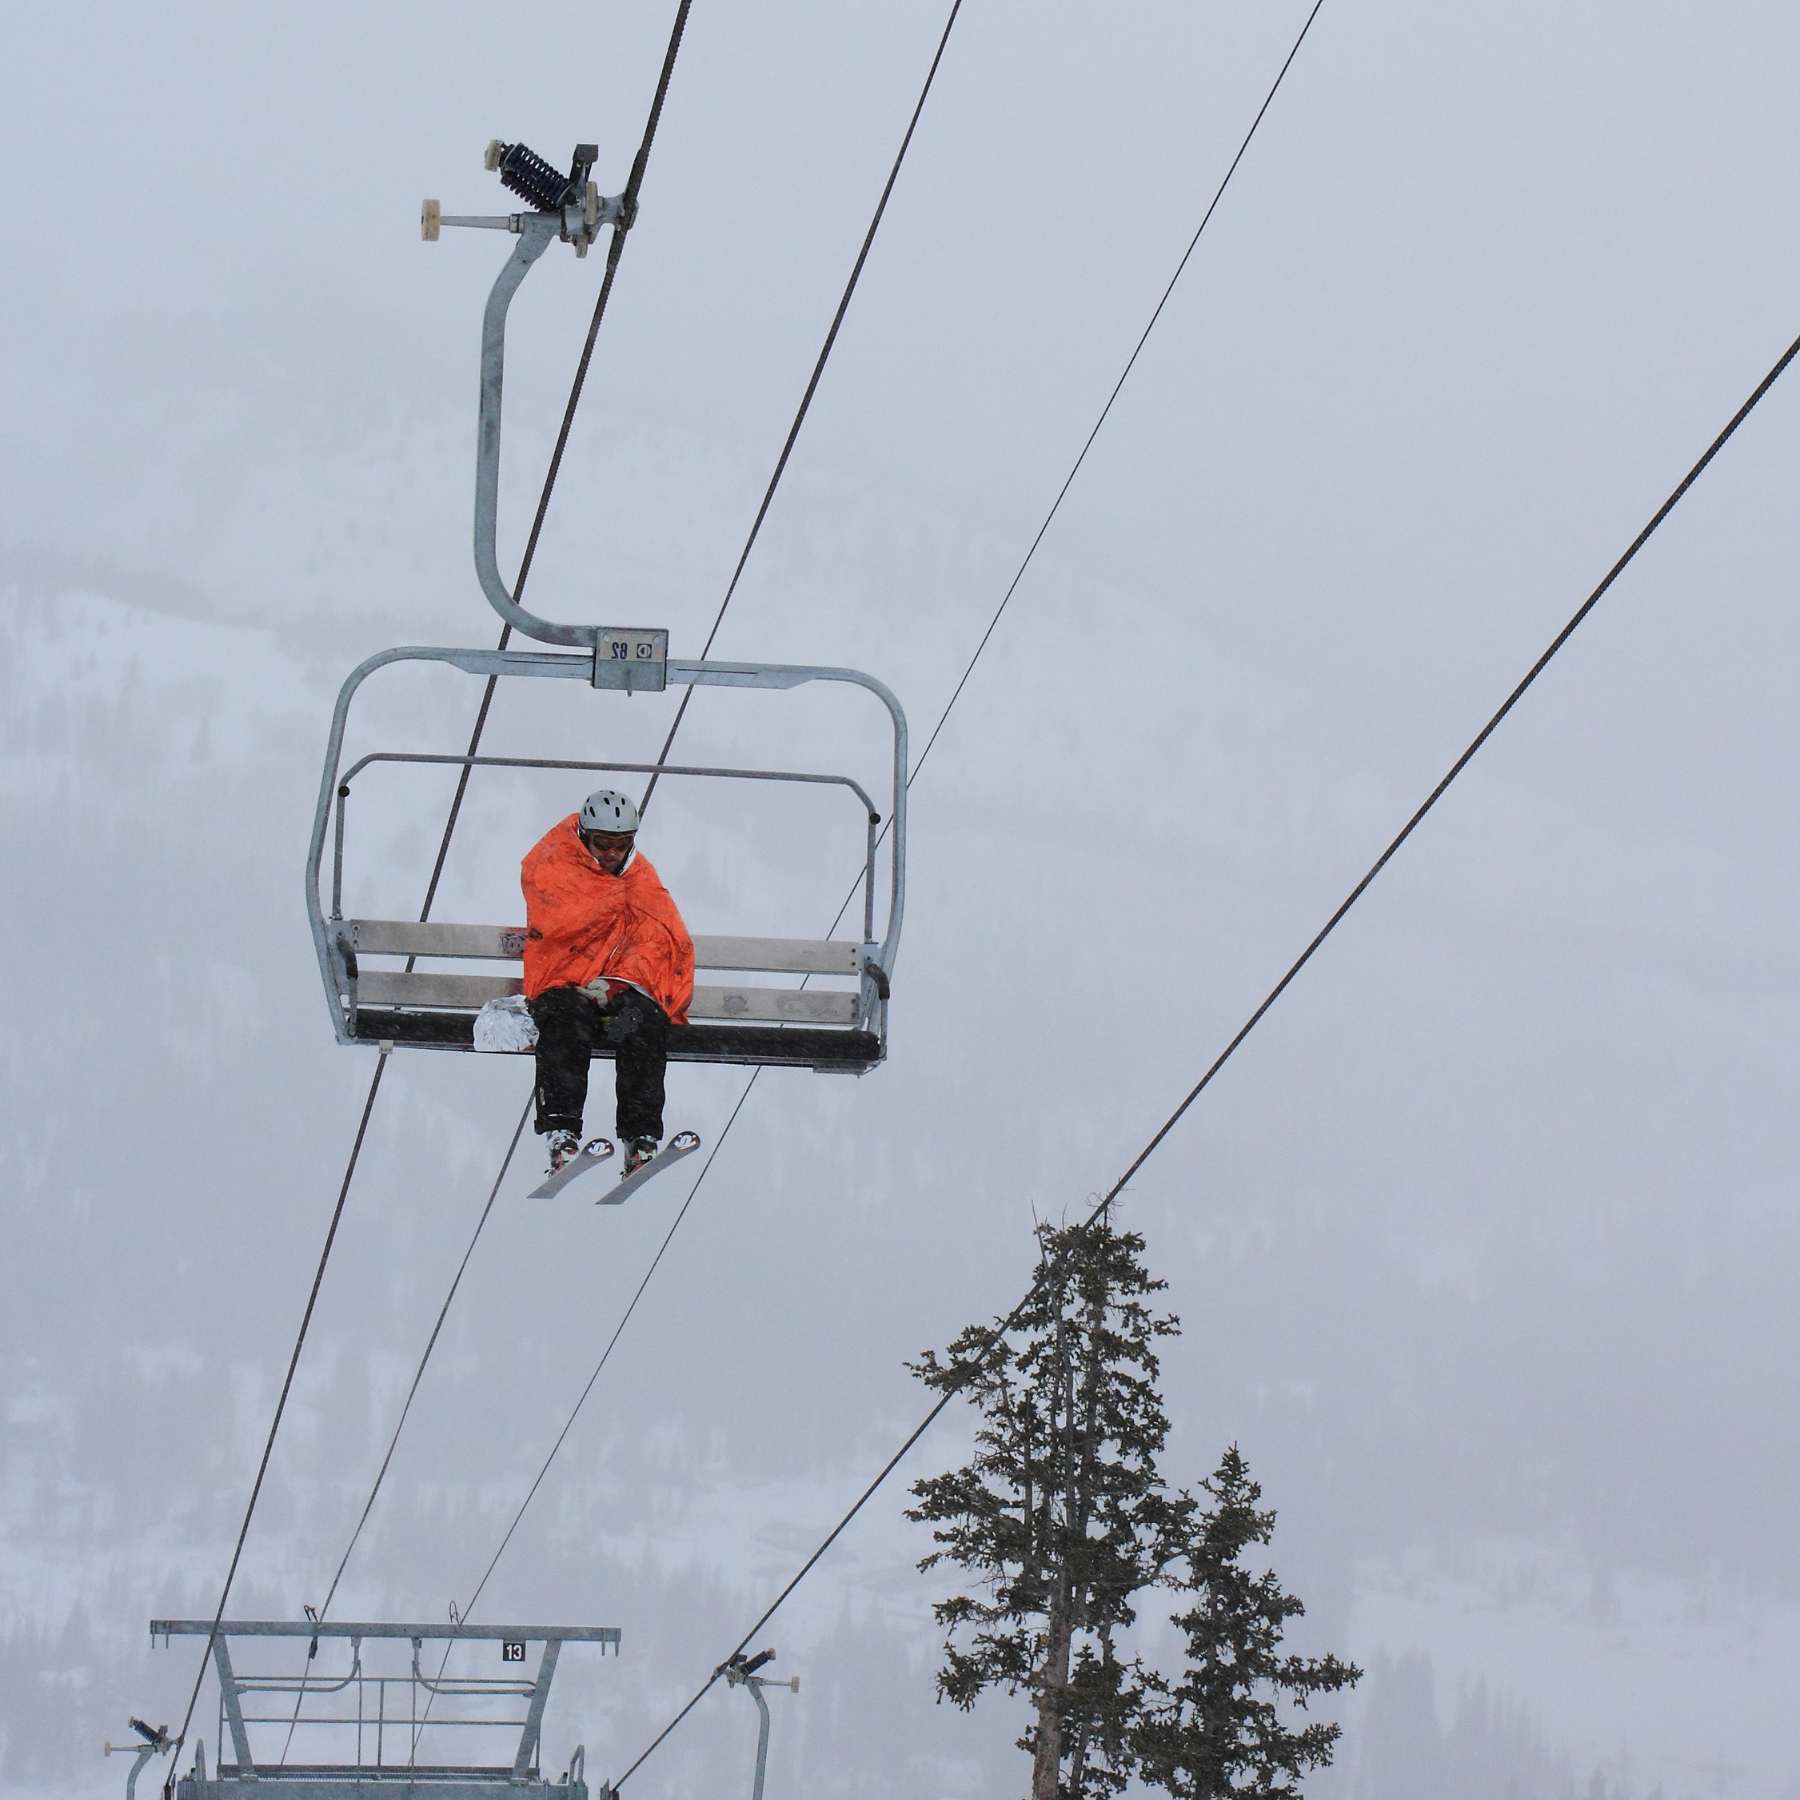 Skier Sitting on Chairlift Wrapped in Orange SOL Emergency Bivvy XL Against a White Sky